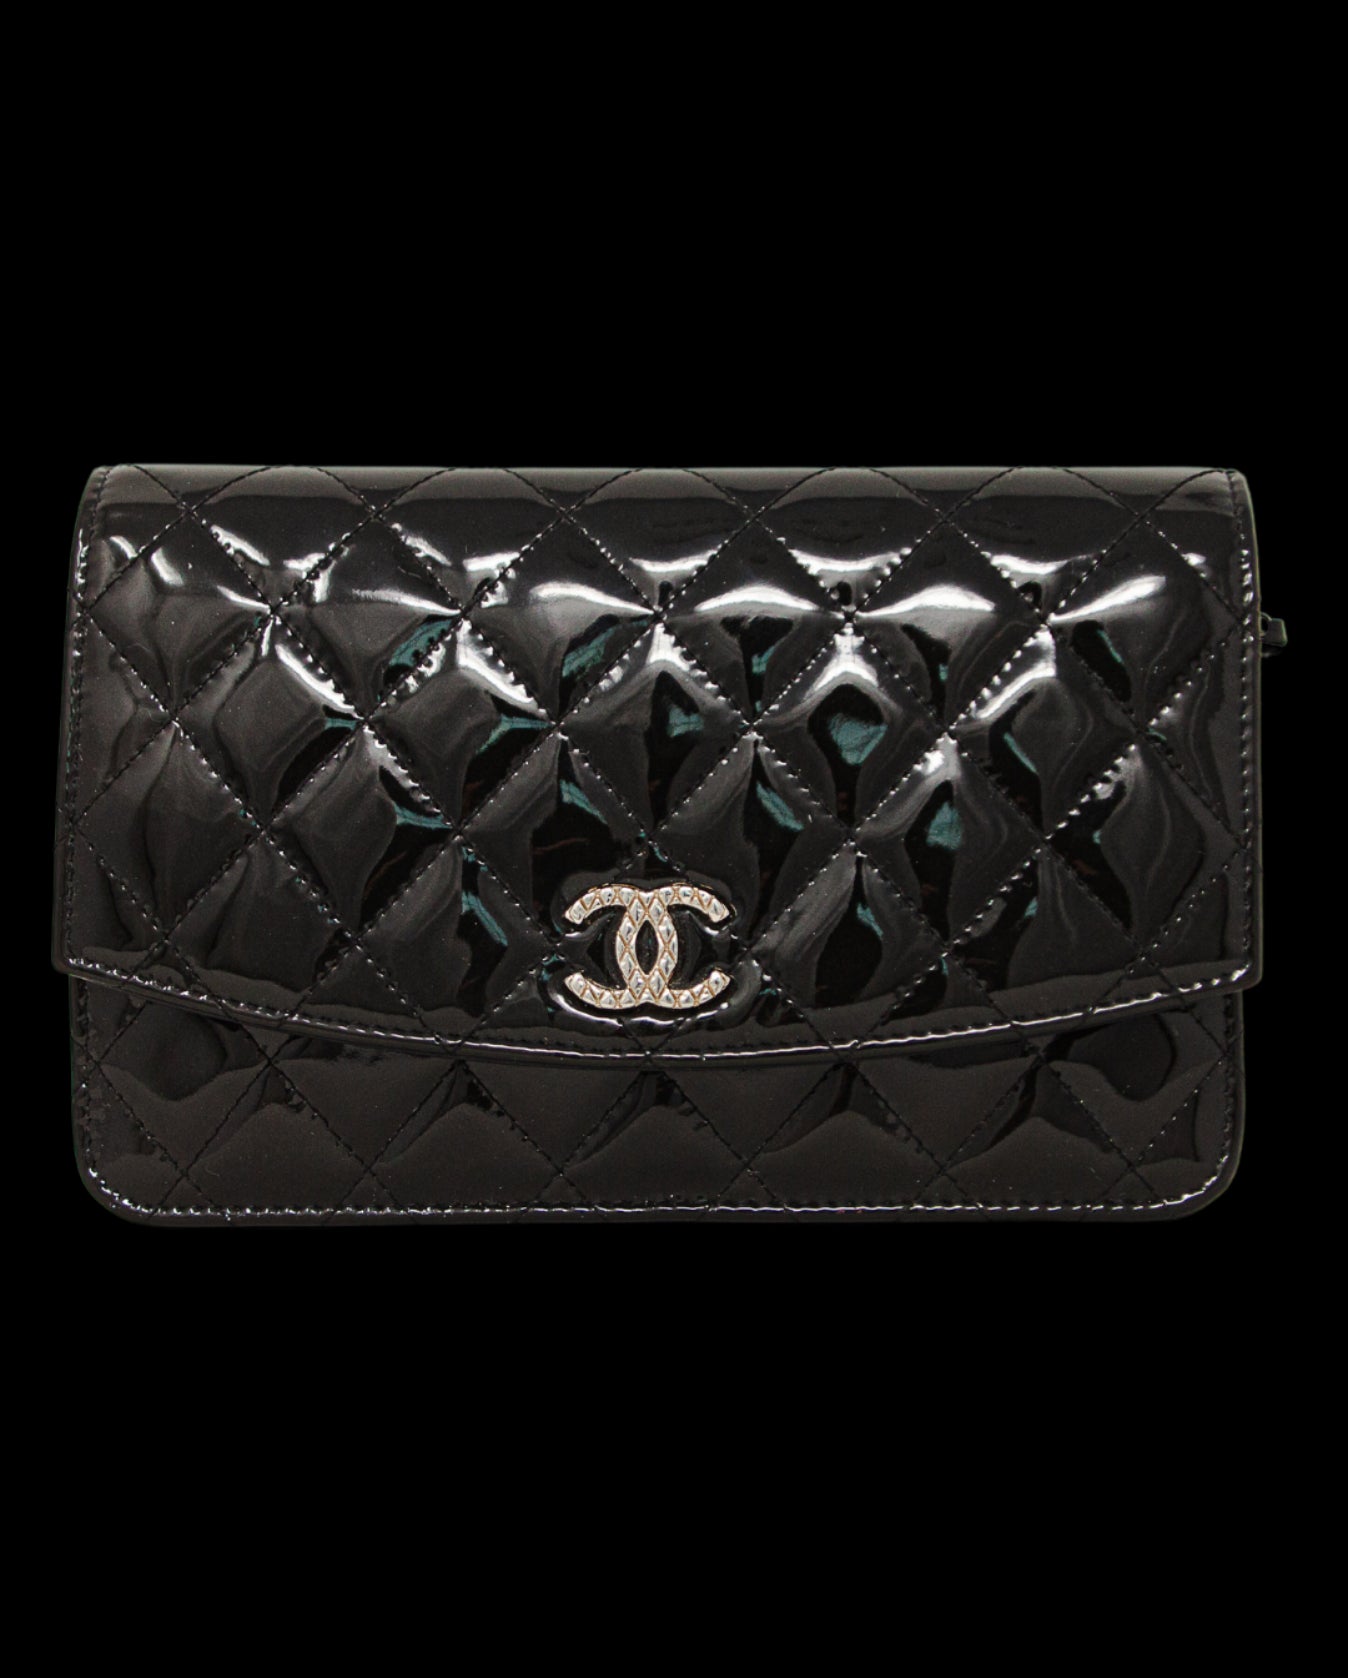 CHANEL WOC Patent Leather Bags & Handbags for Women, Authenticity  Guaranteed